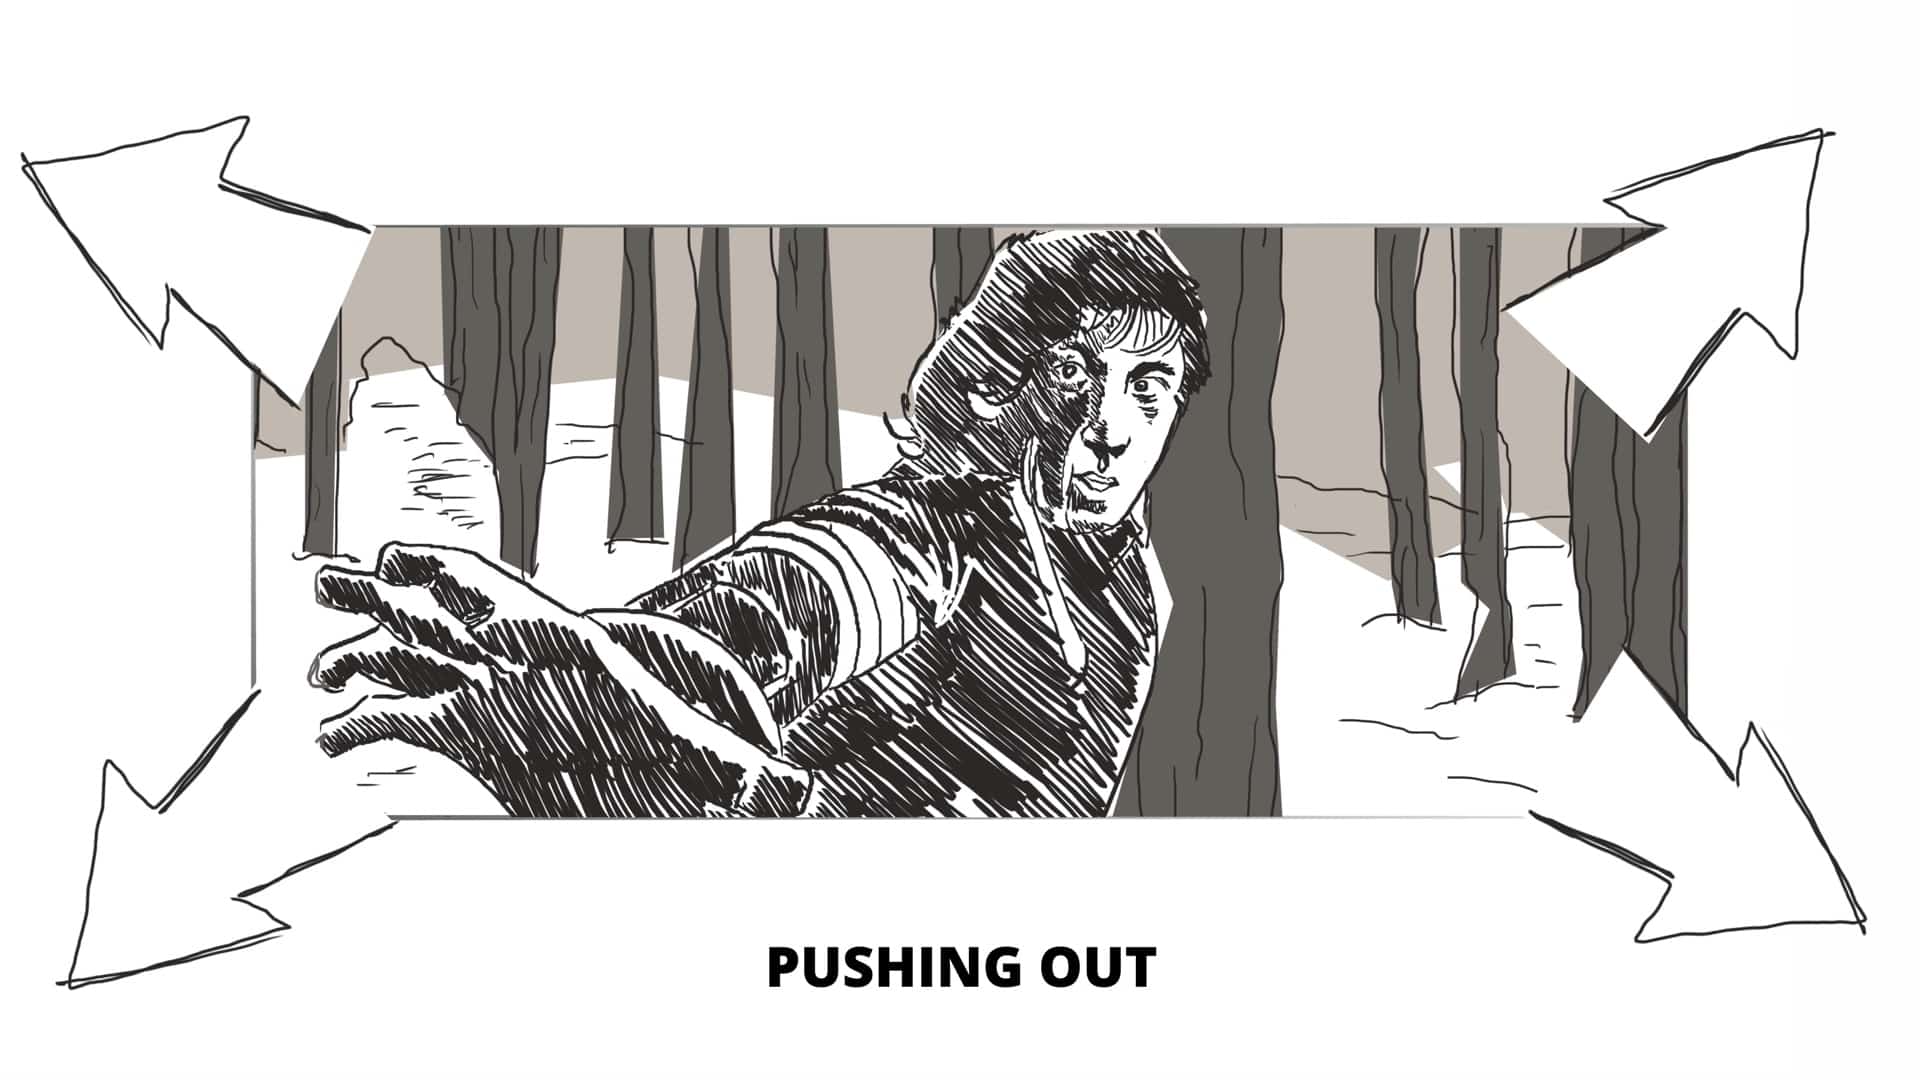 How to Make a Storyboard - Pushing Out - StudioBinder